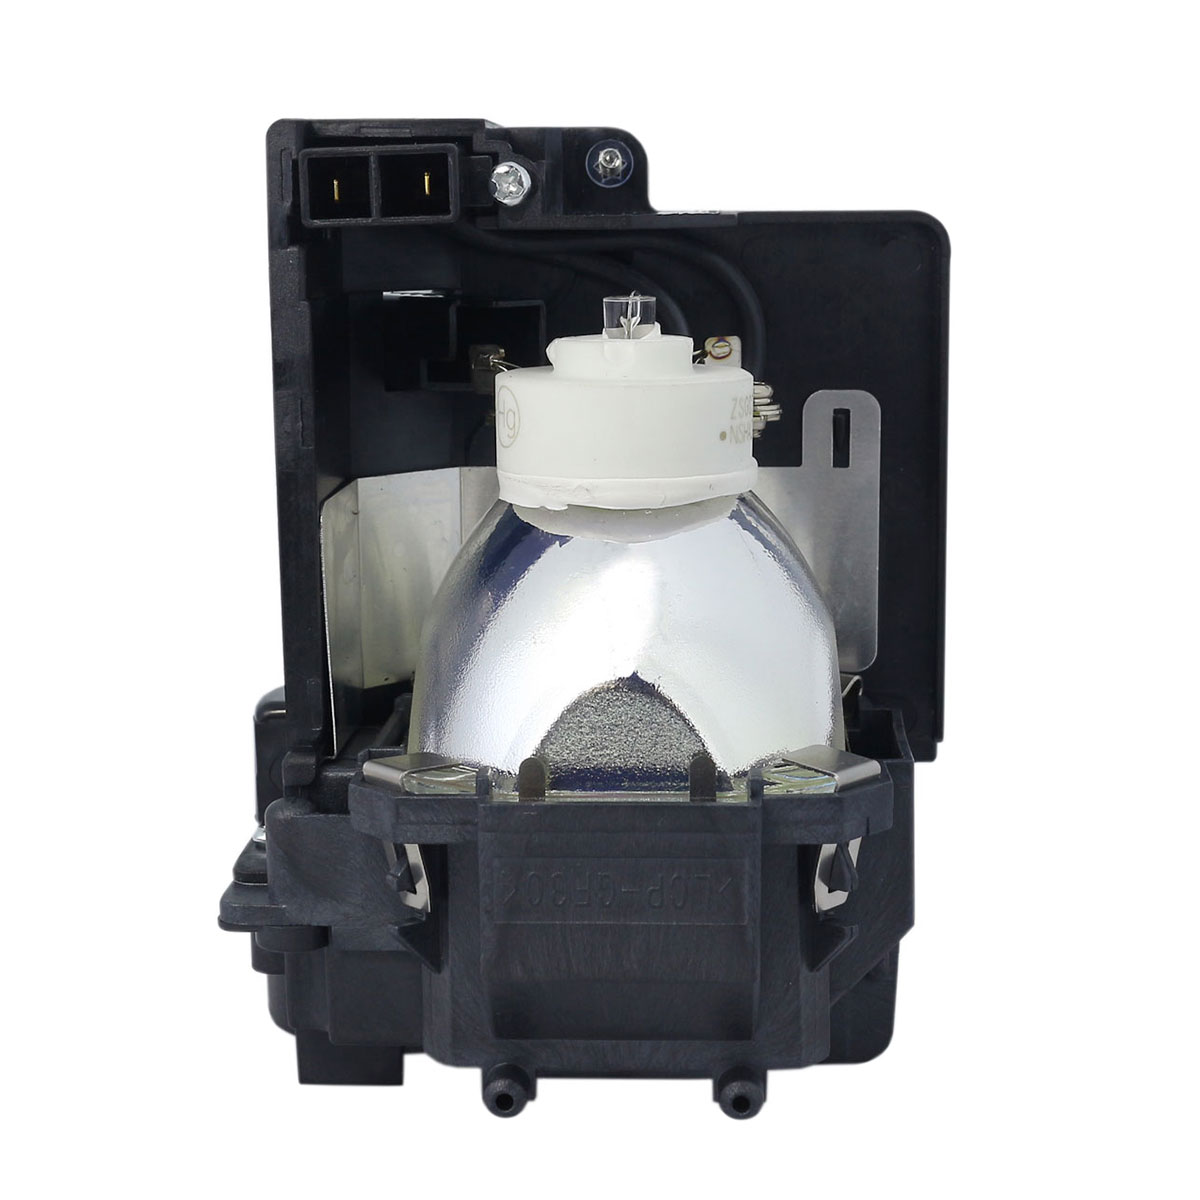 Original Ushio Replacement Lamp & Housing for the NEC UM301W Projector - image 4 of 7